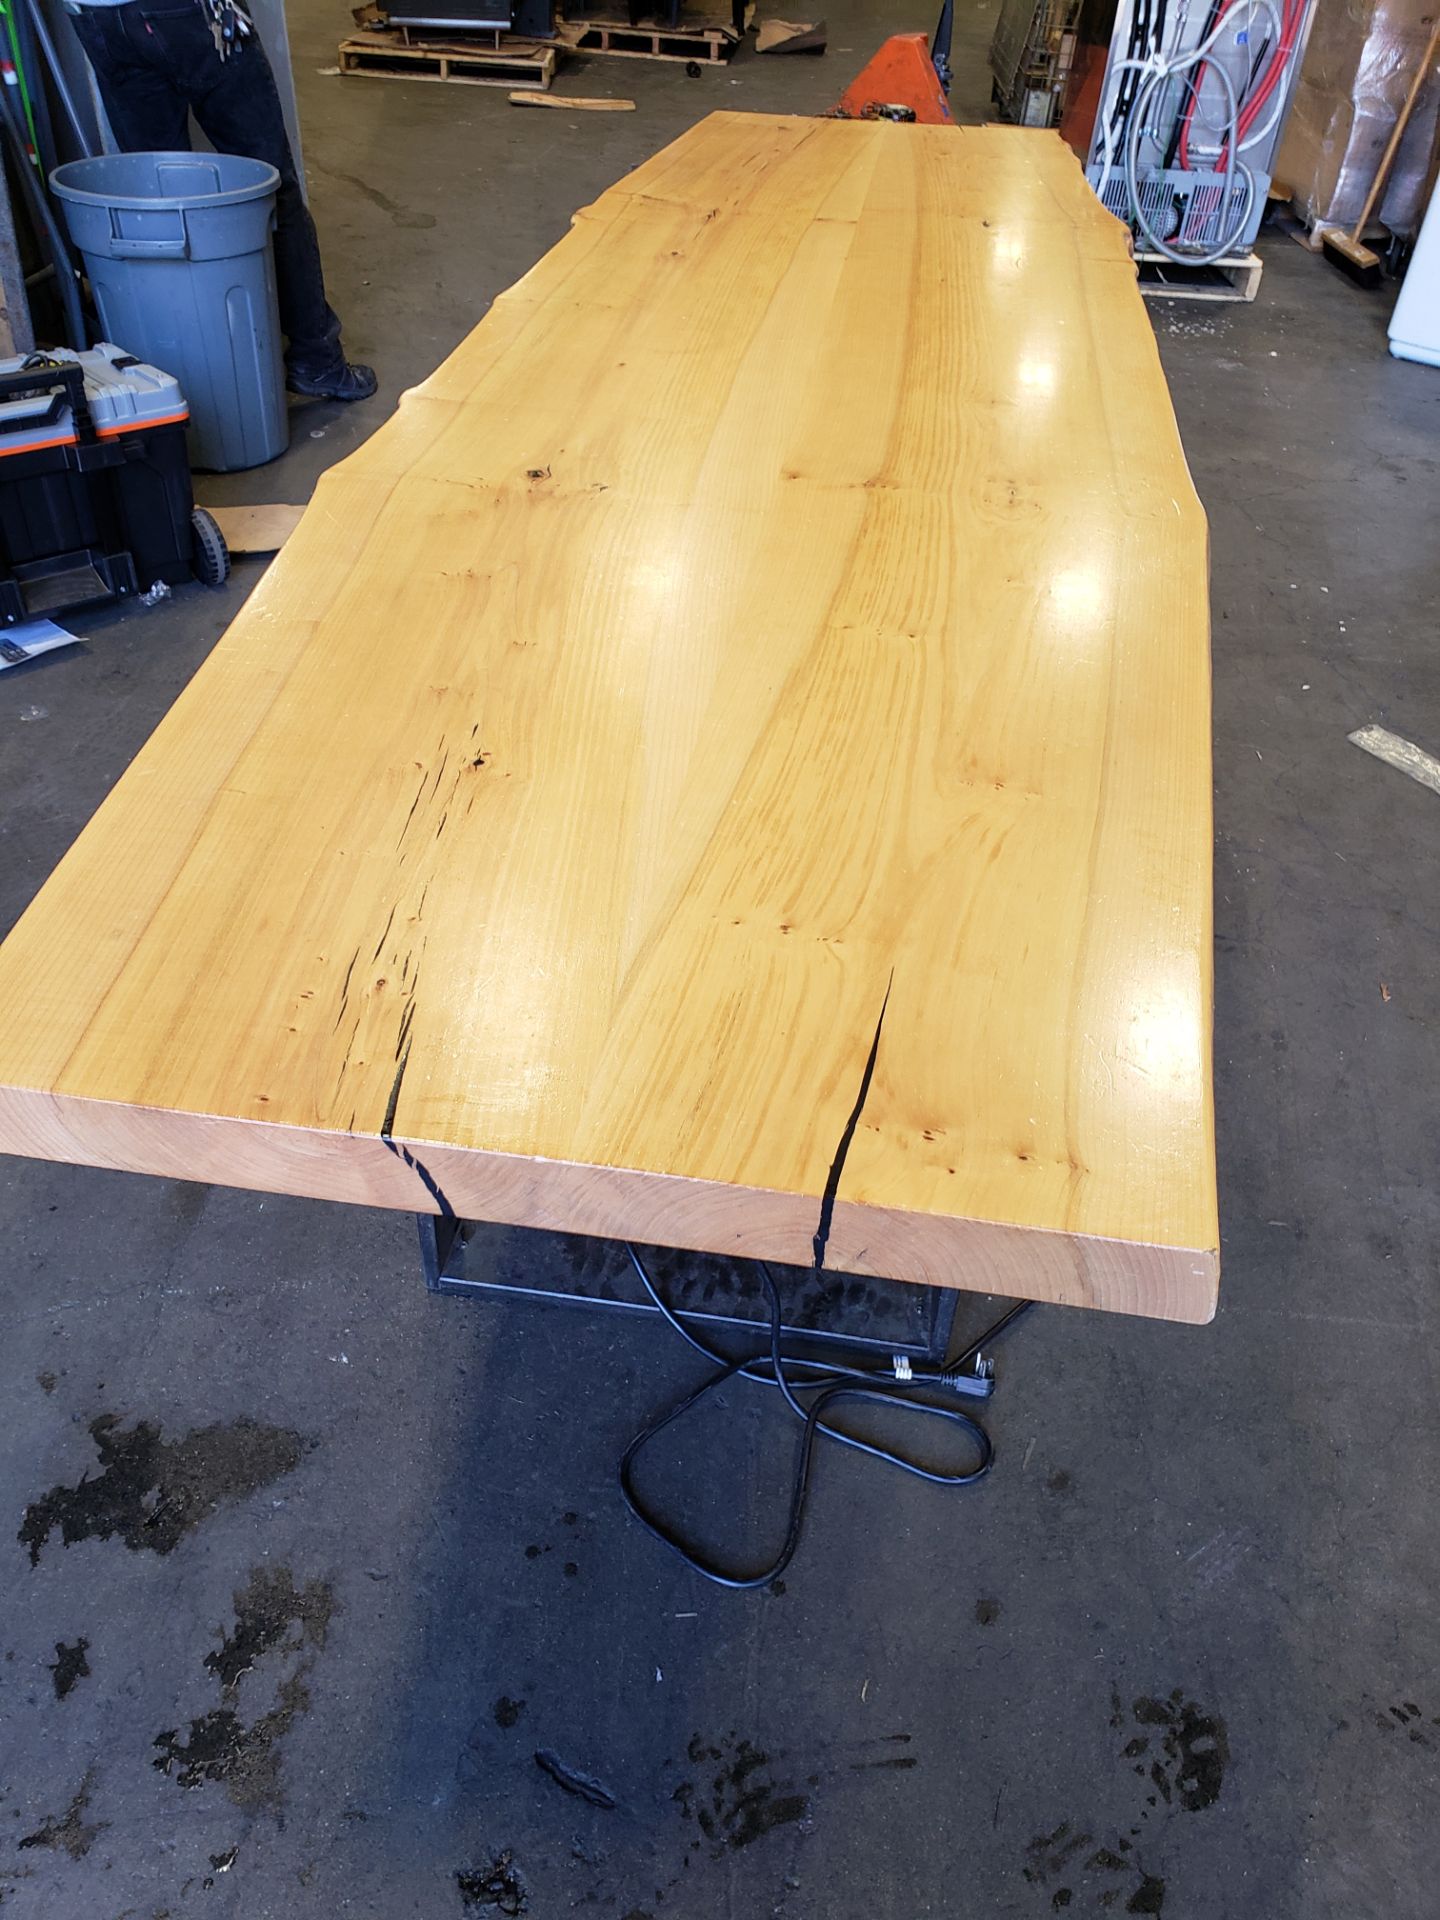 10' Live-Edge Table with Power, LAN and USB Ports - Image 2 of 8